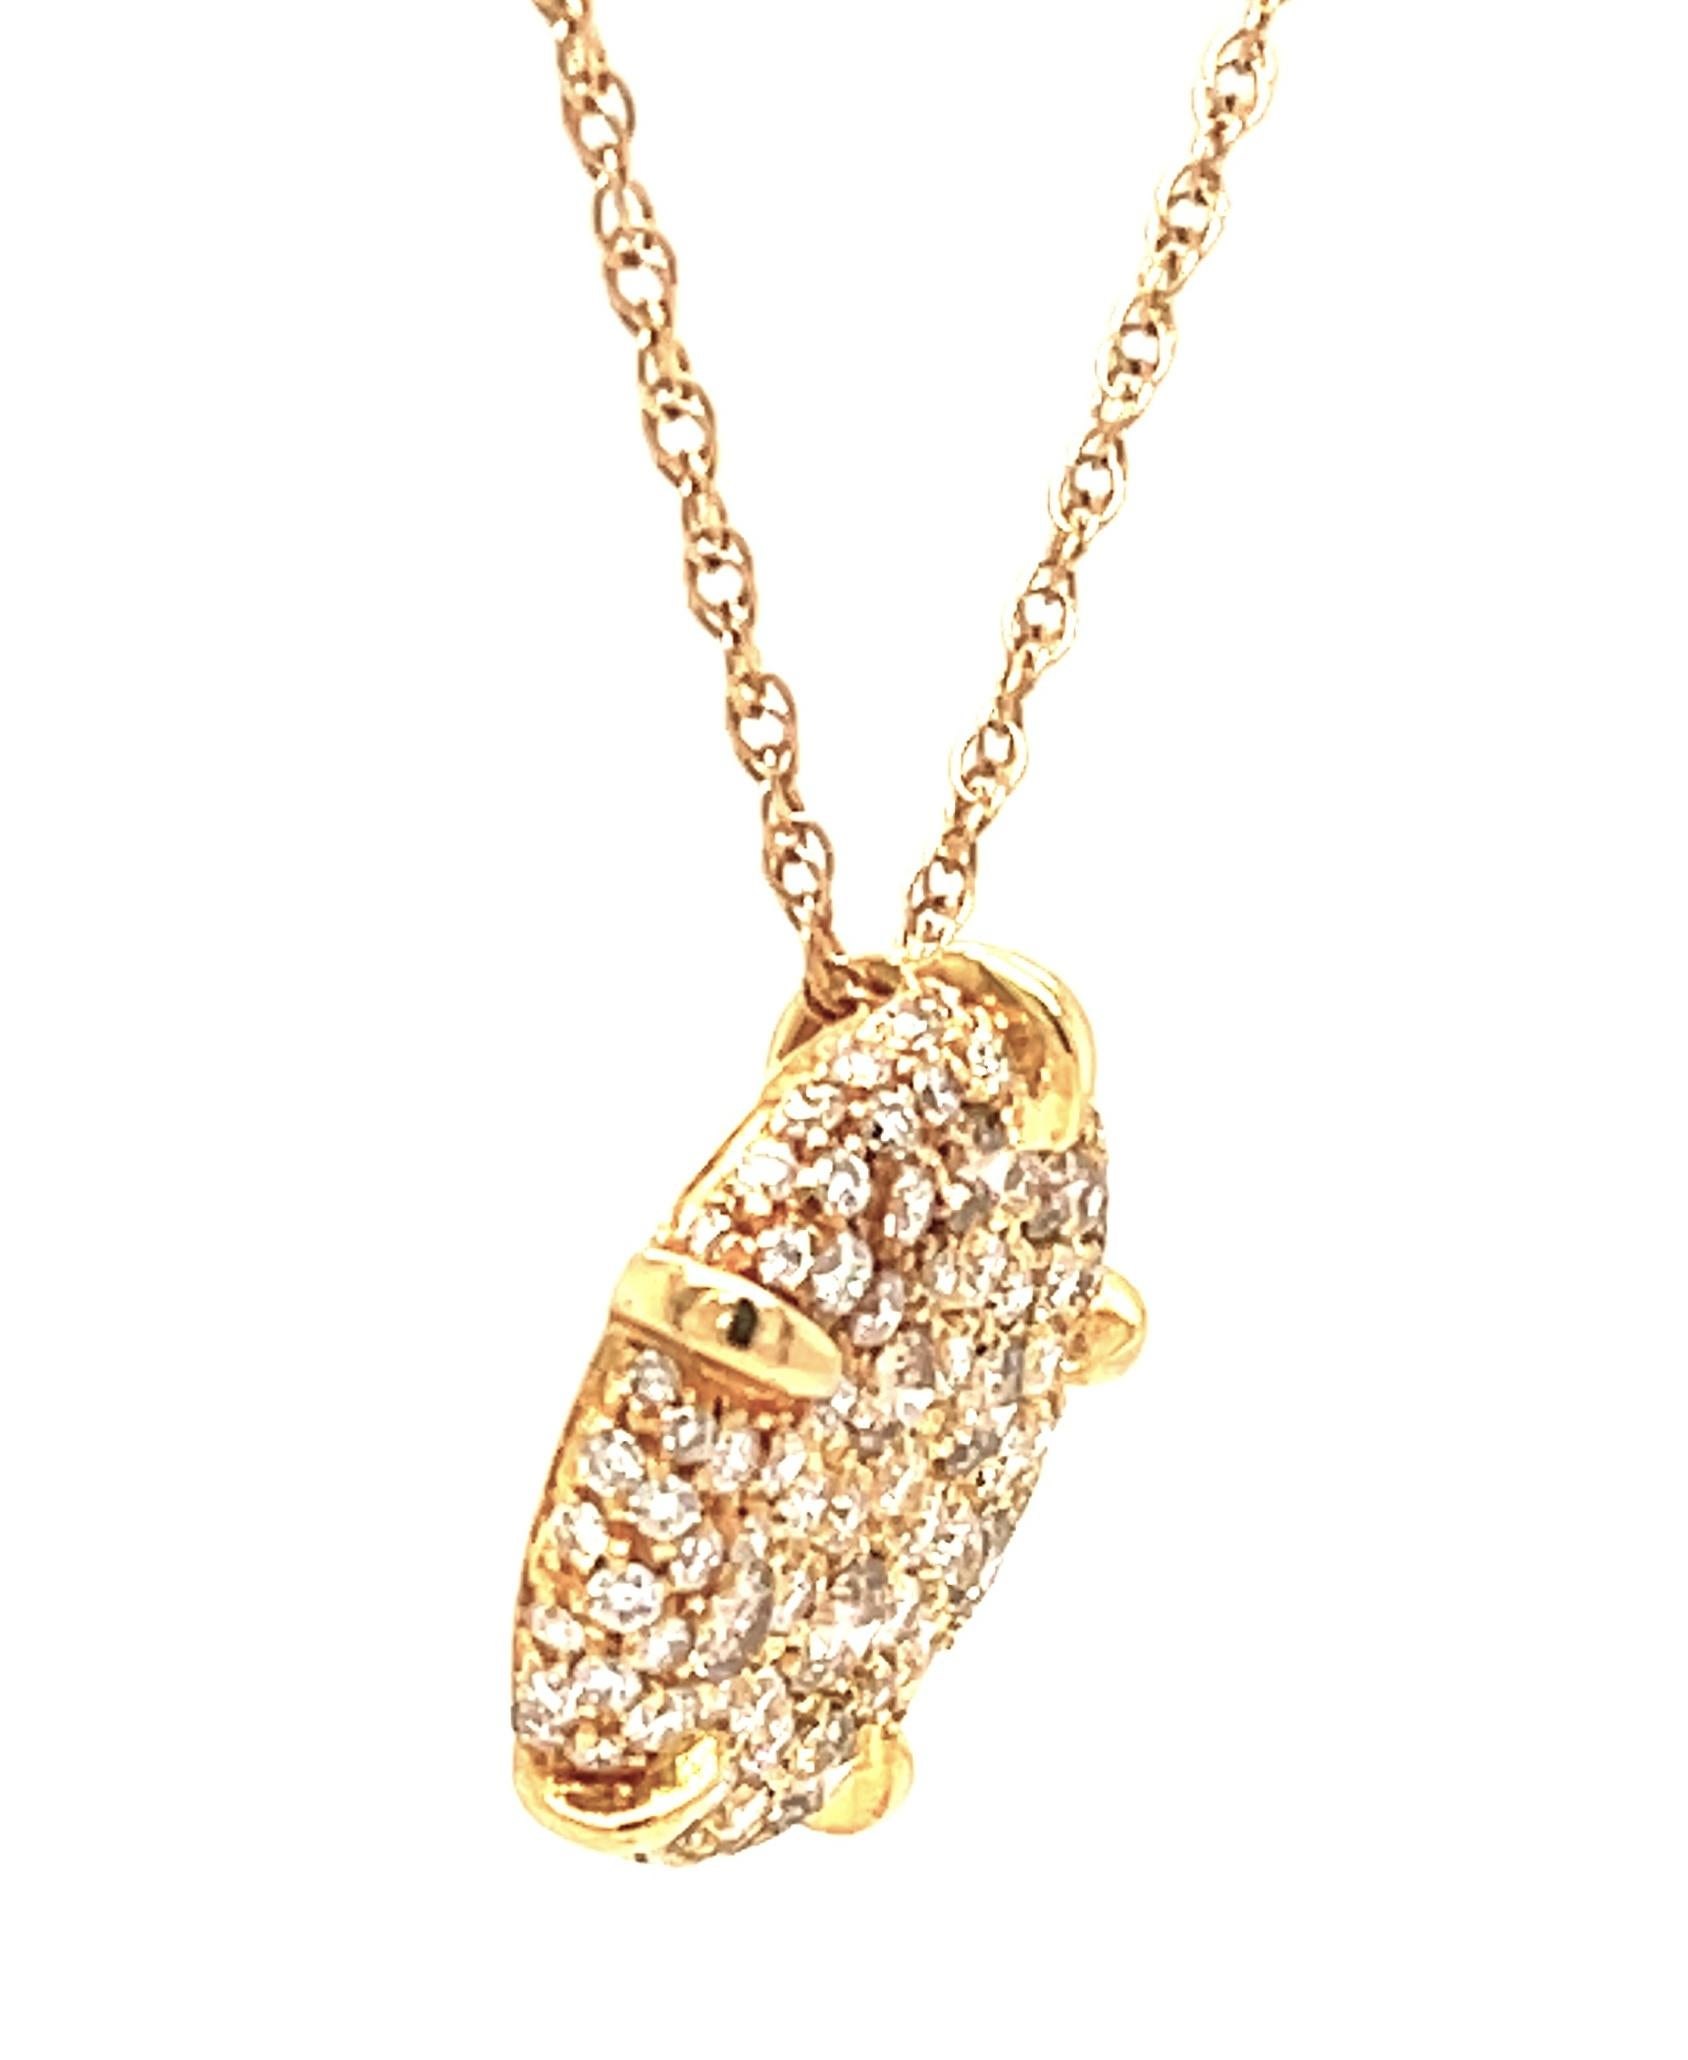 Natural diamonds come in all shapes, sizes and colors! This sparkling necklace is handmade in 18k yellow gold and pave set with a combination of diamonds with colorless and gorgeous champagne hues. It is perfect for every day wear and  will make you